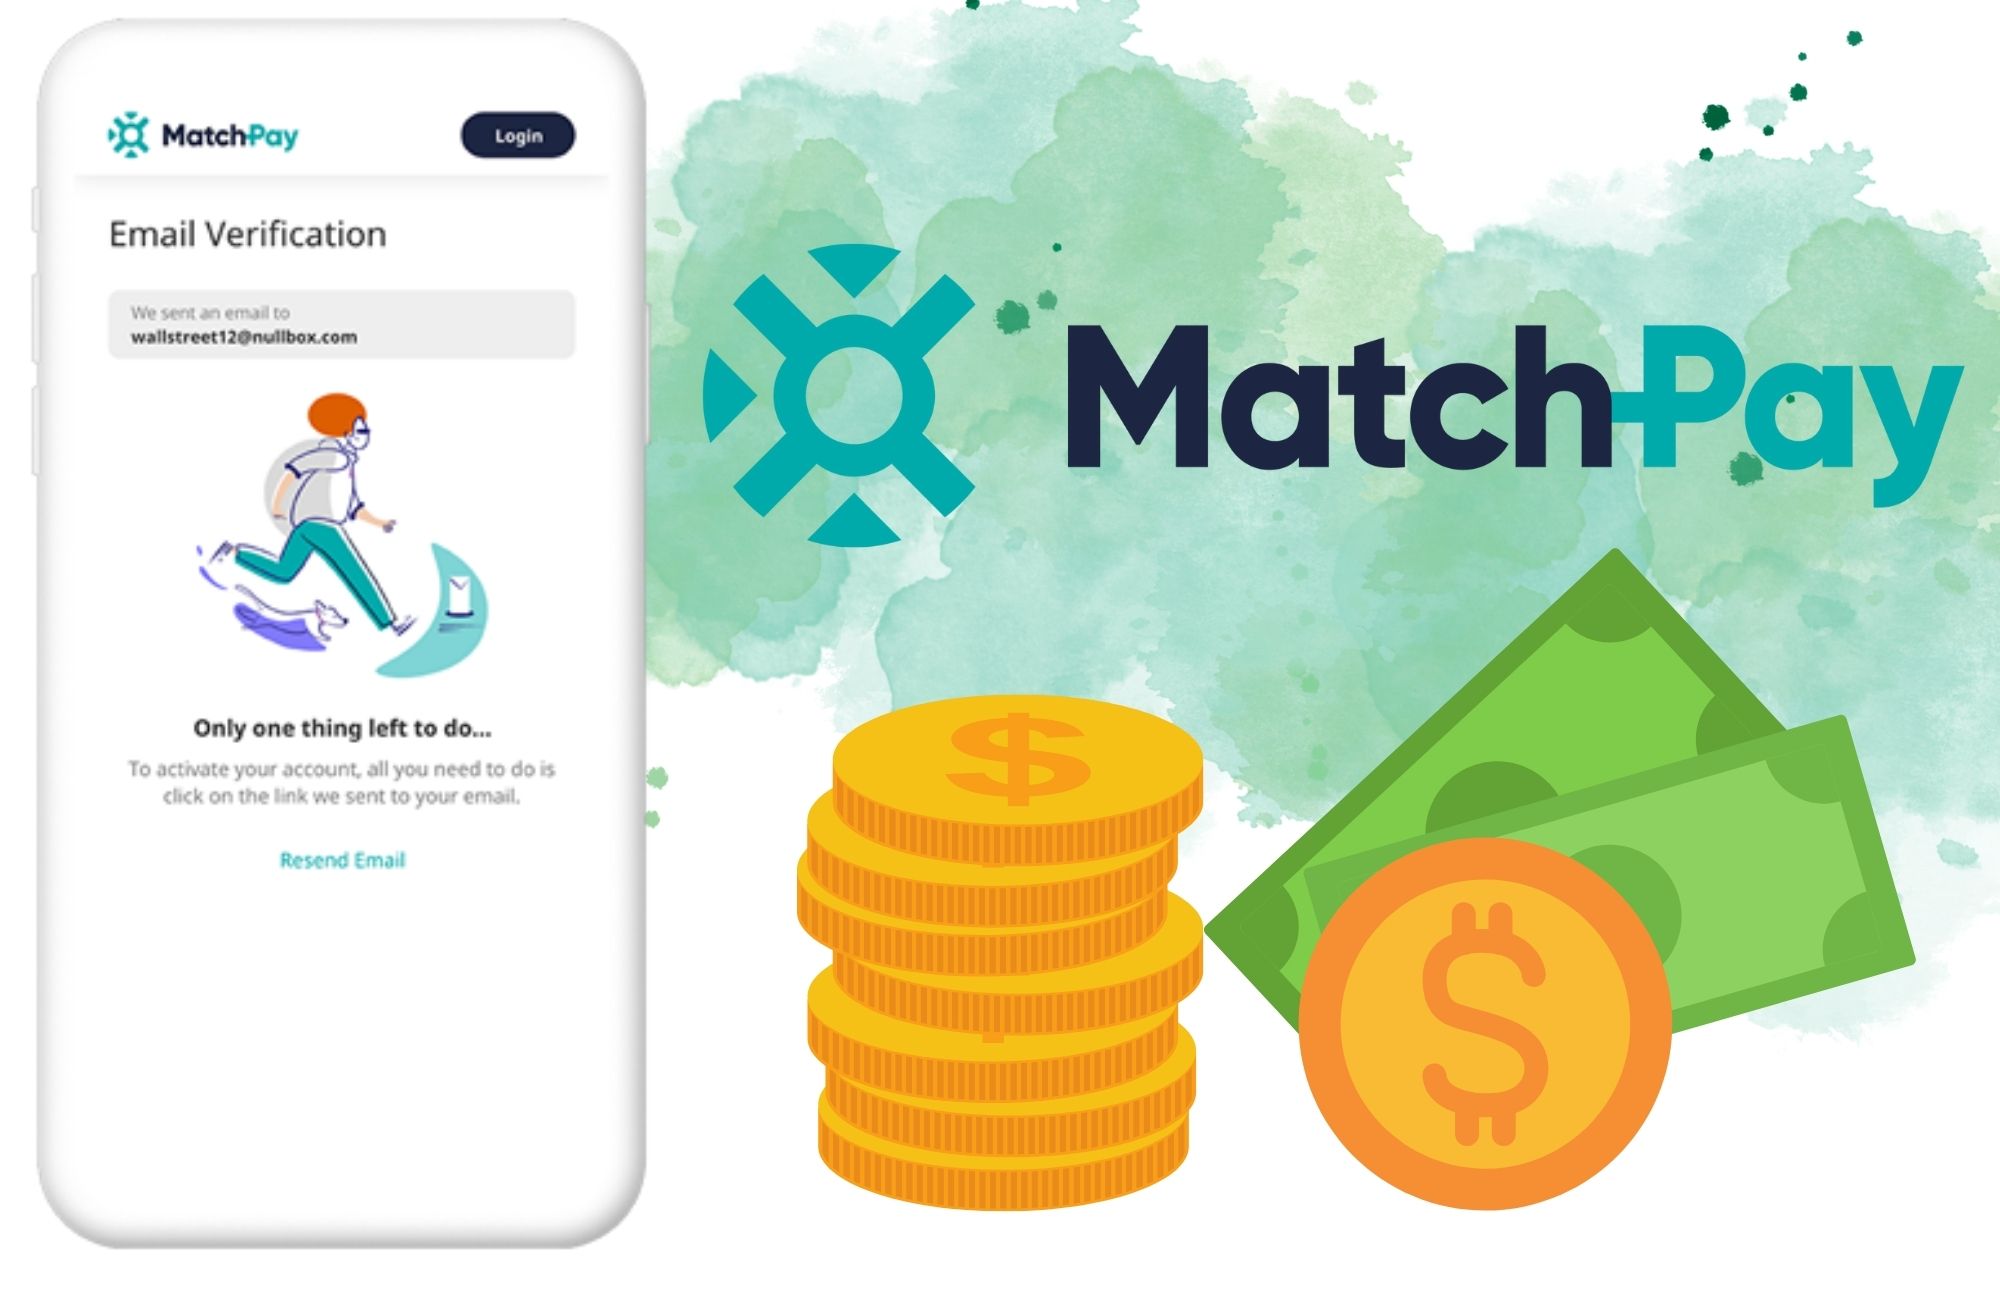 Matchpay Trading - Is It Safe And Secure?